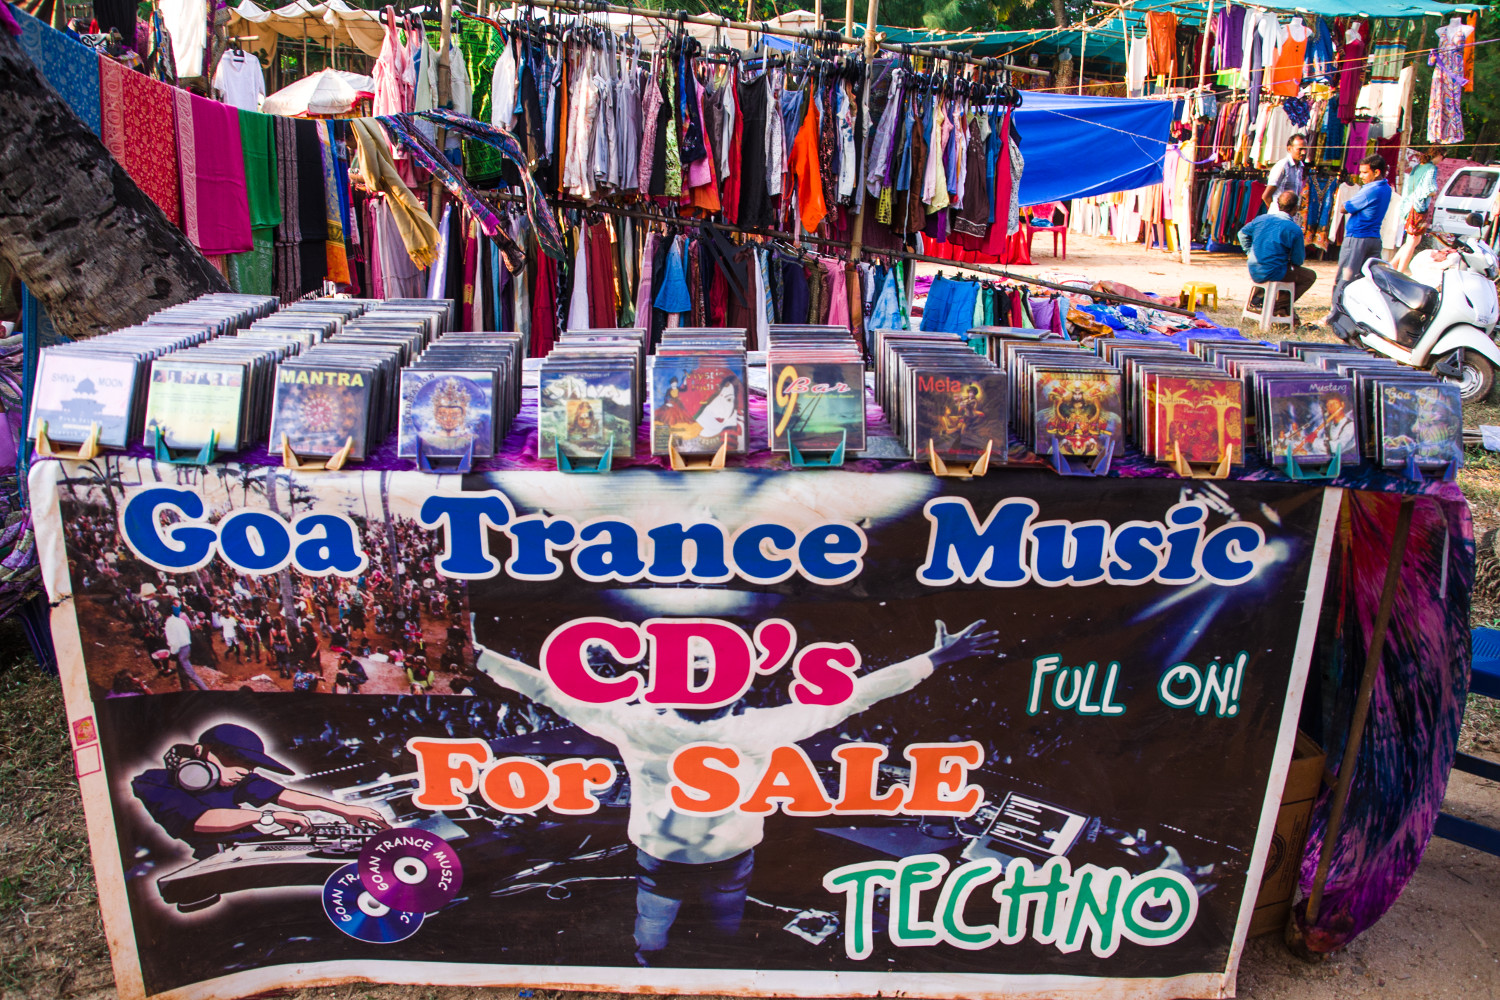 Goa trance CDs on sale in Anjuna. Image by Paul Harding / Lonely Planet